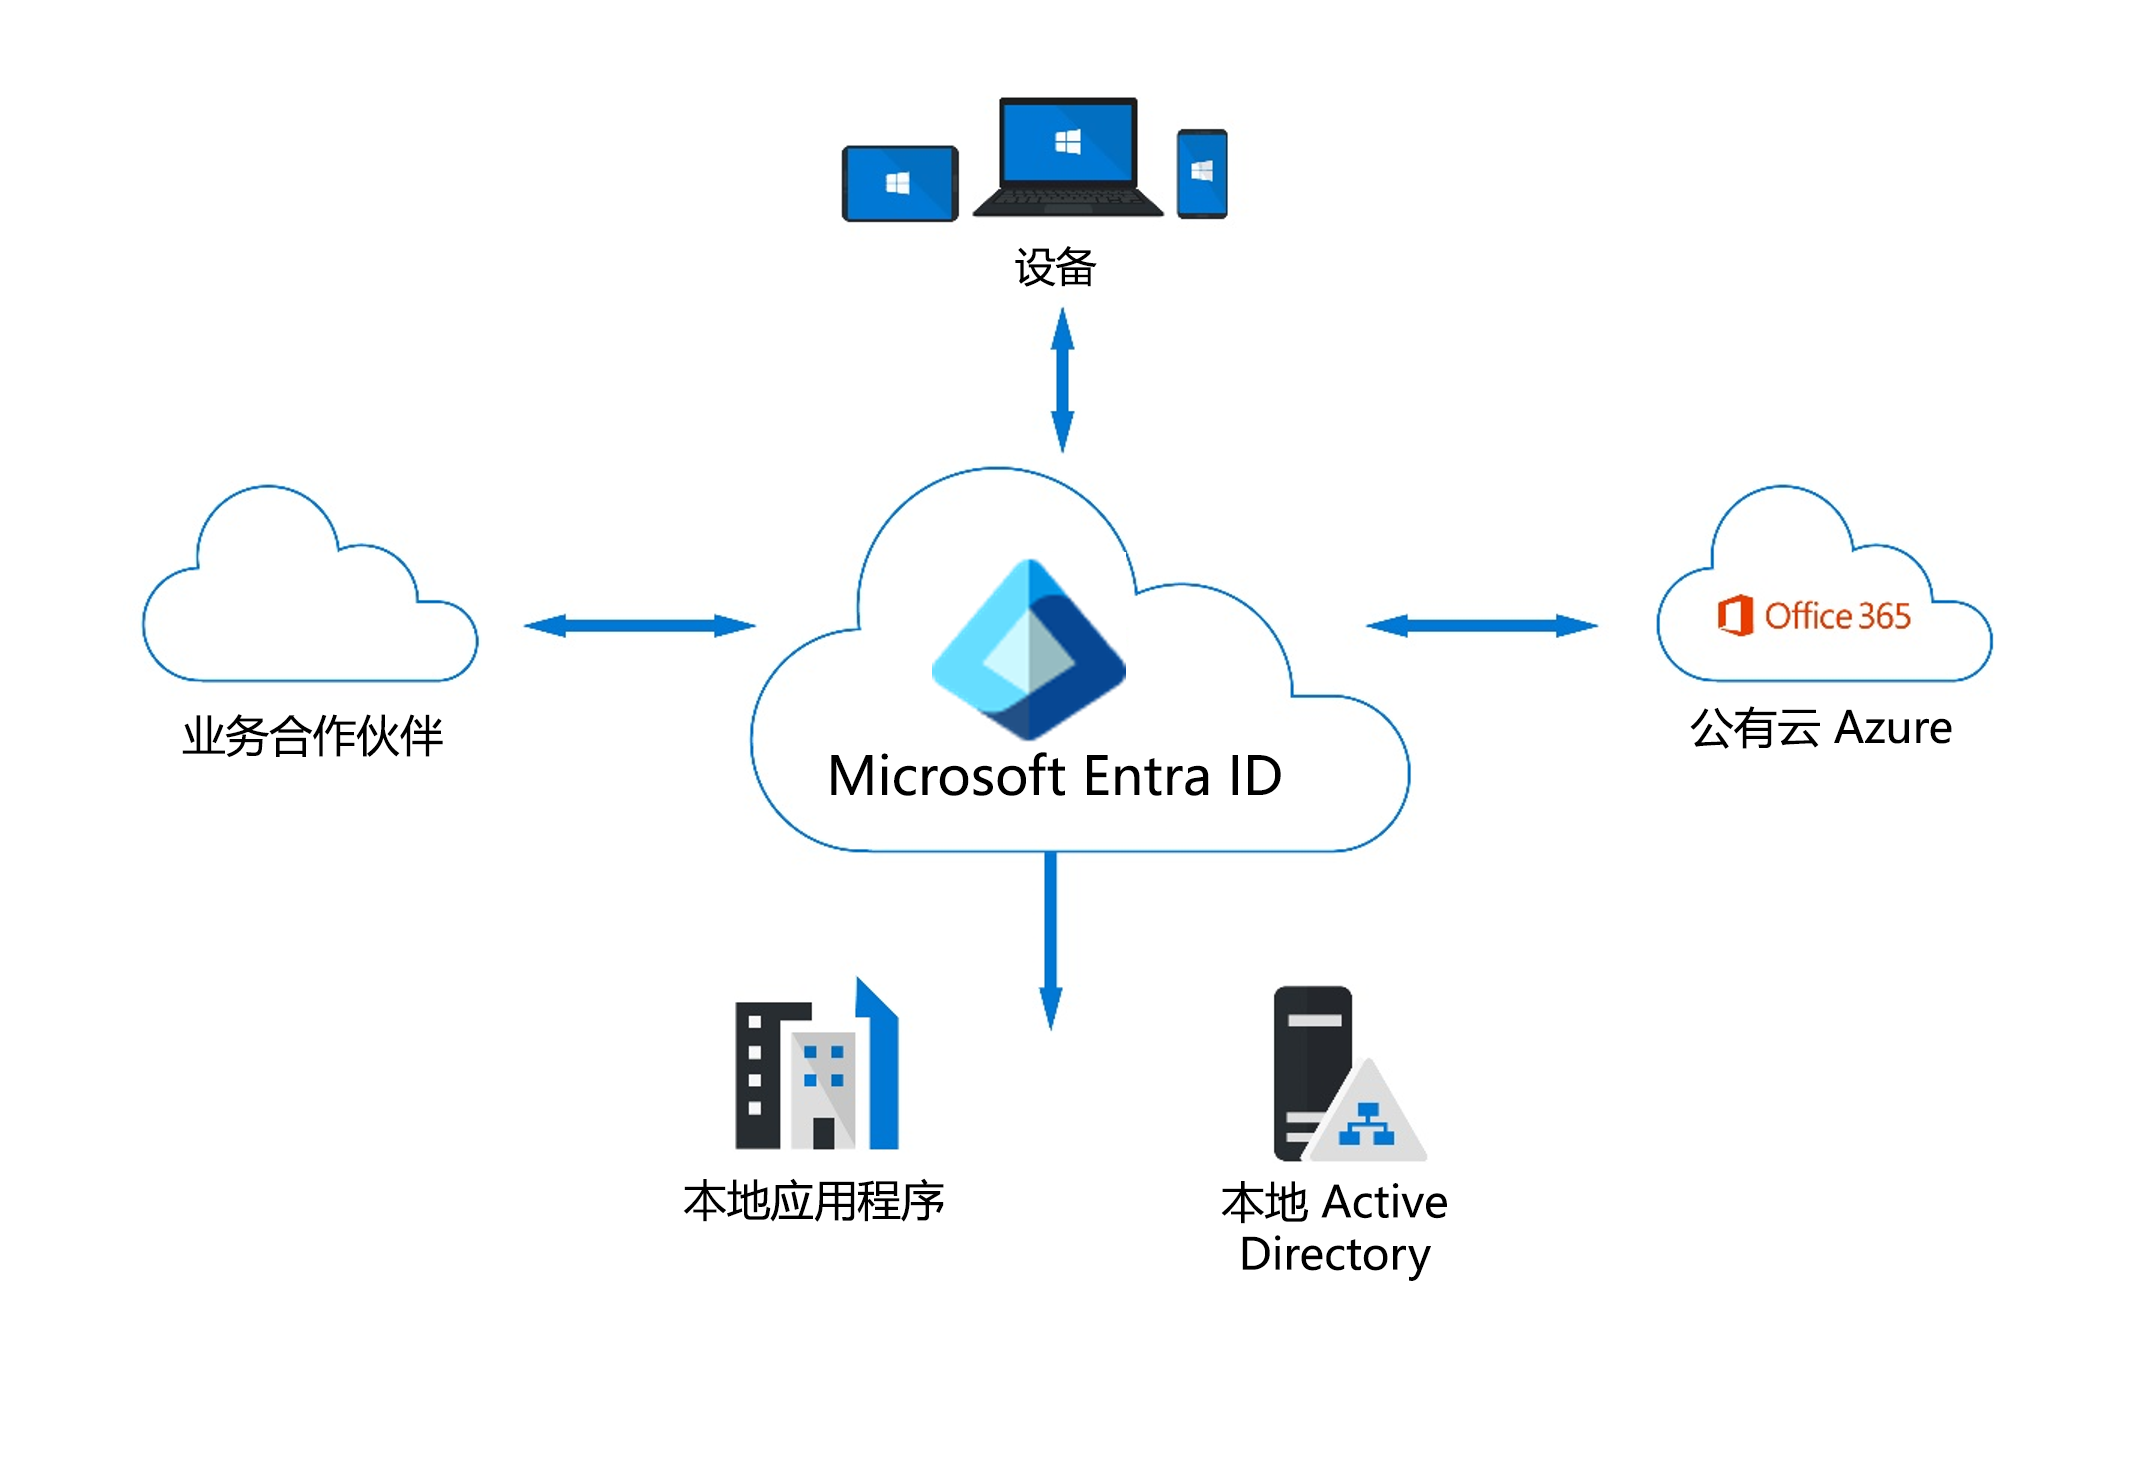 Diagram showing Microsoft Entra ID as a cloud-based identity provider that works with cloud apps such as M365, devices, and on-premises applications.